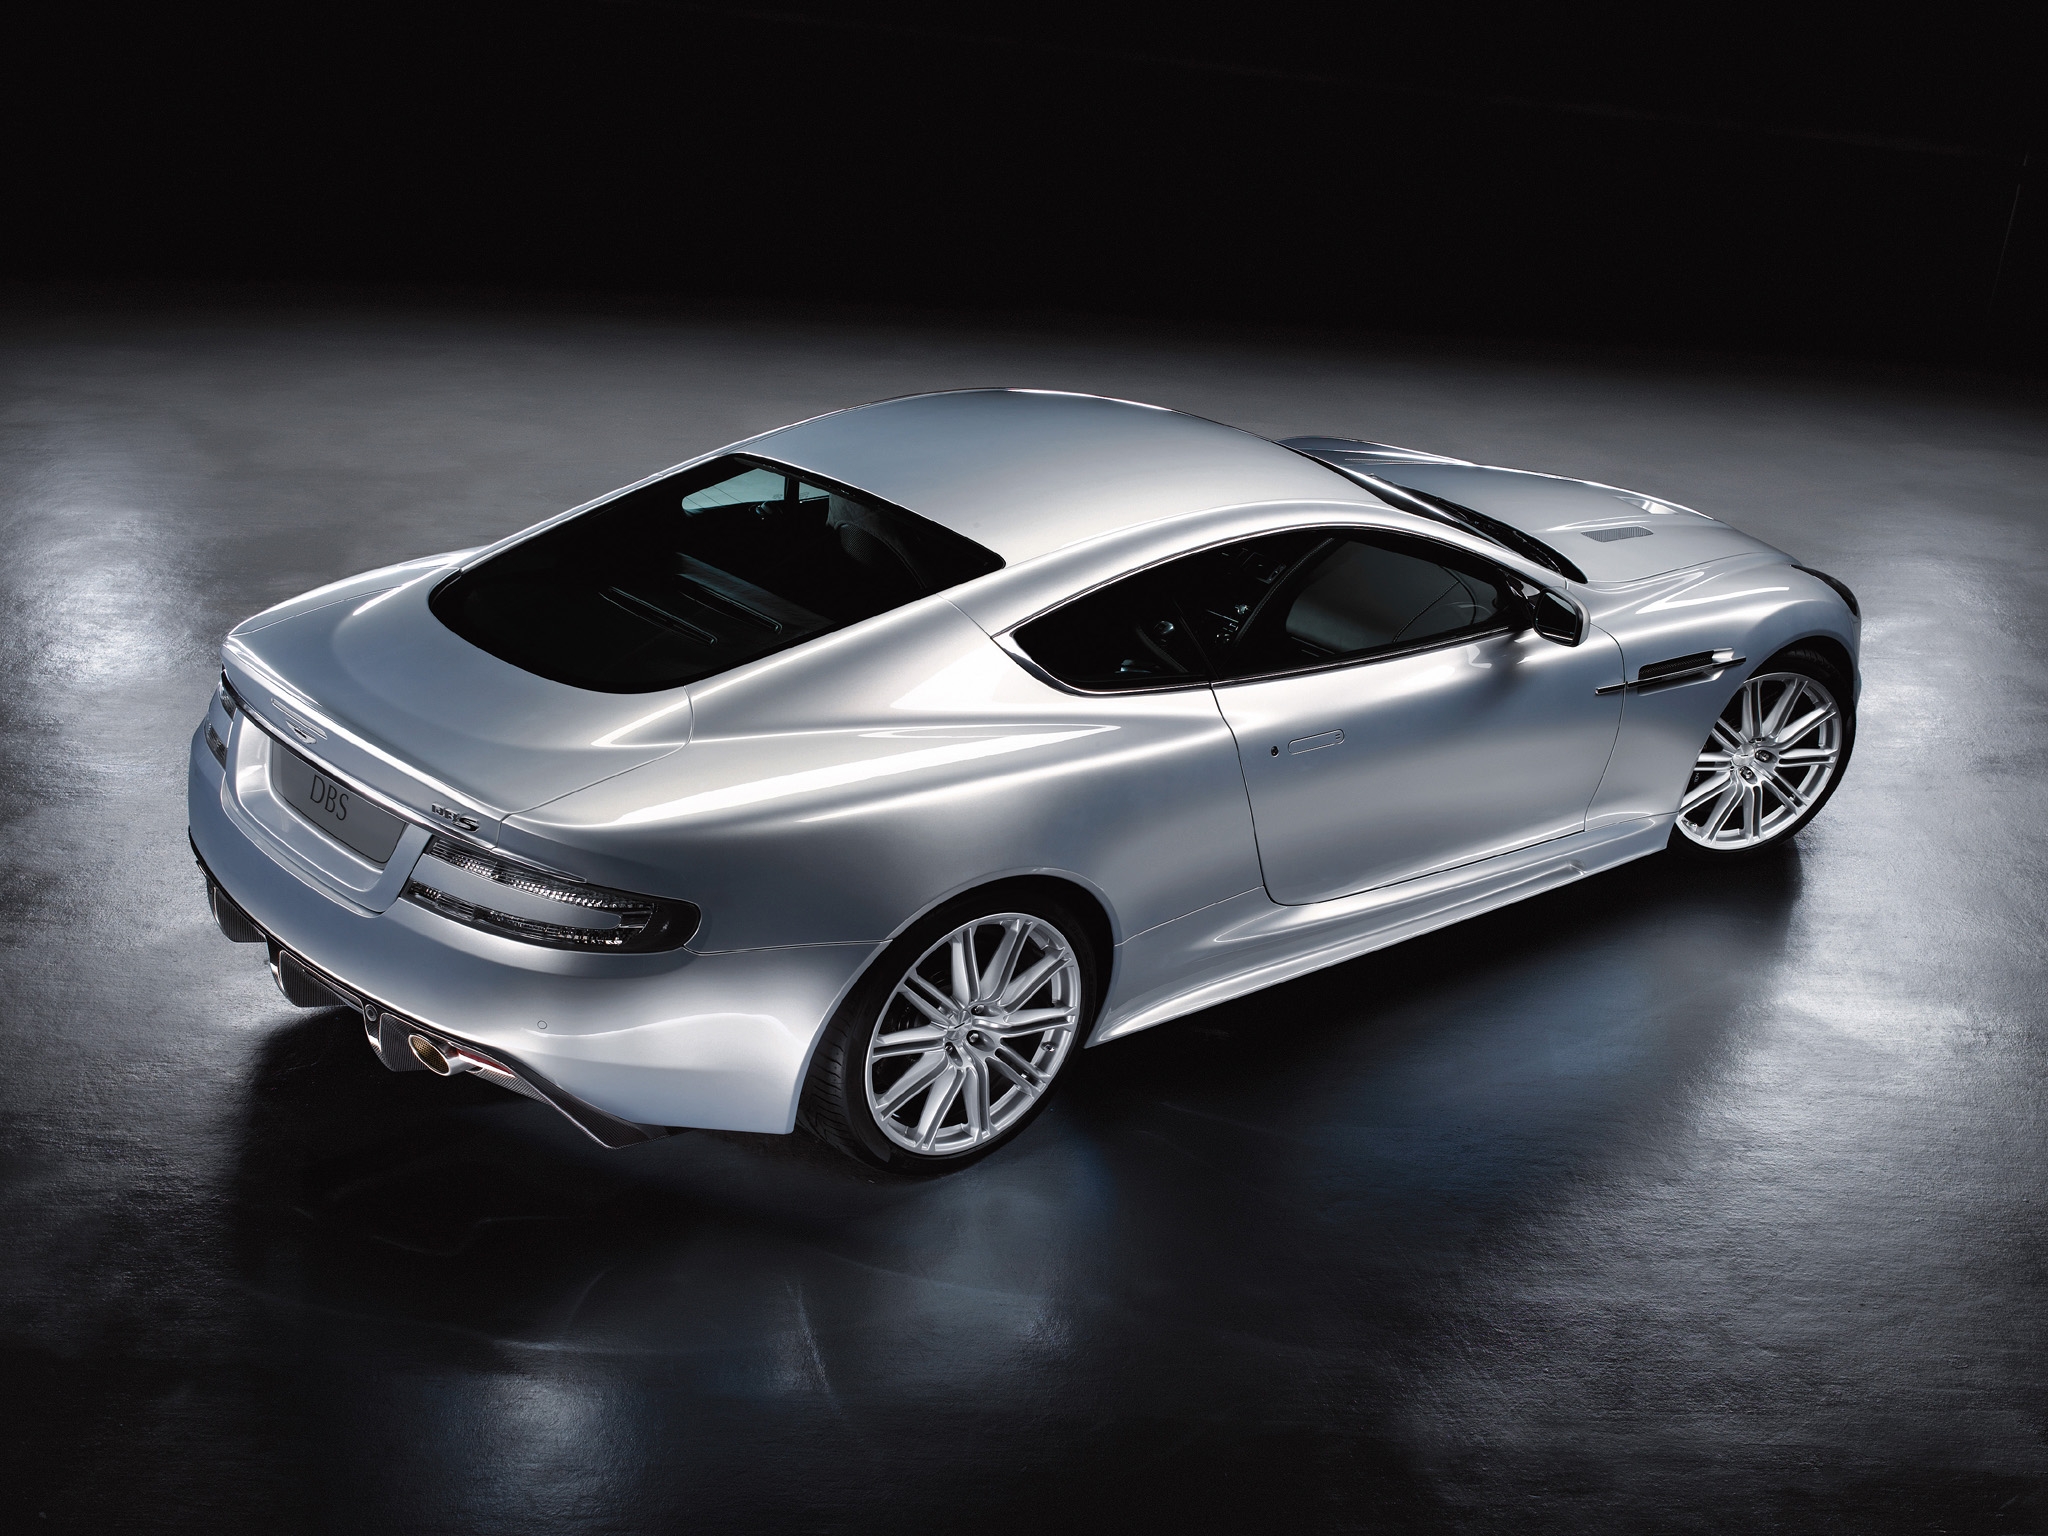 HD wallpaper auto, aston martin, cars, view from above, style, dbs, 2008, silver metallic